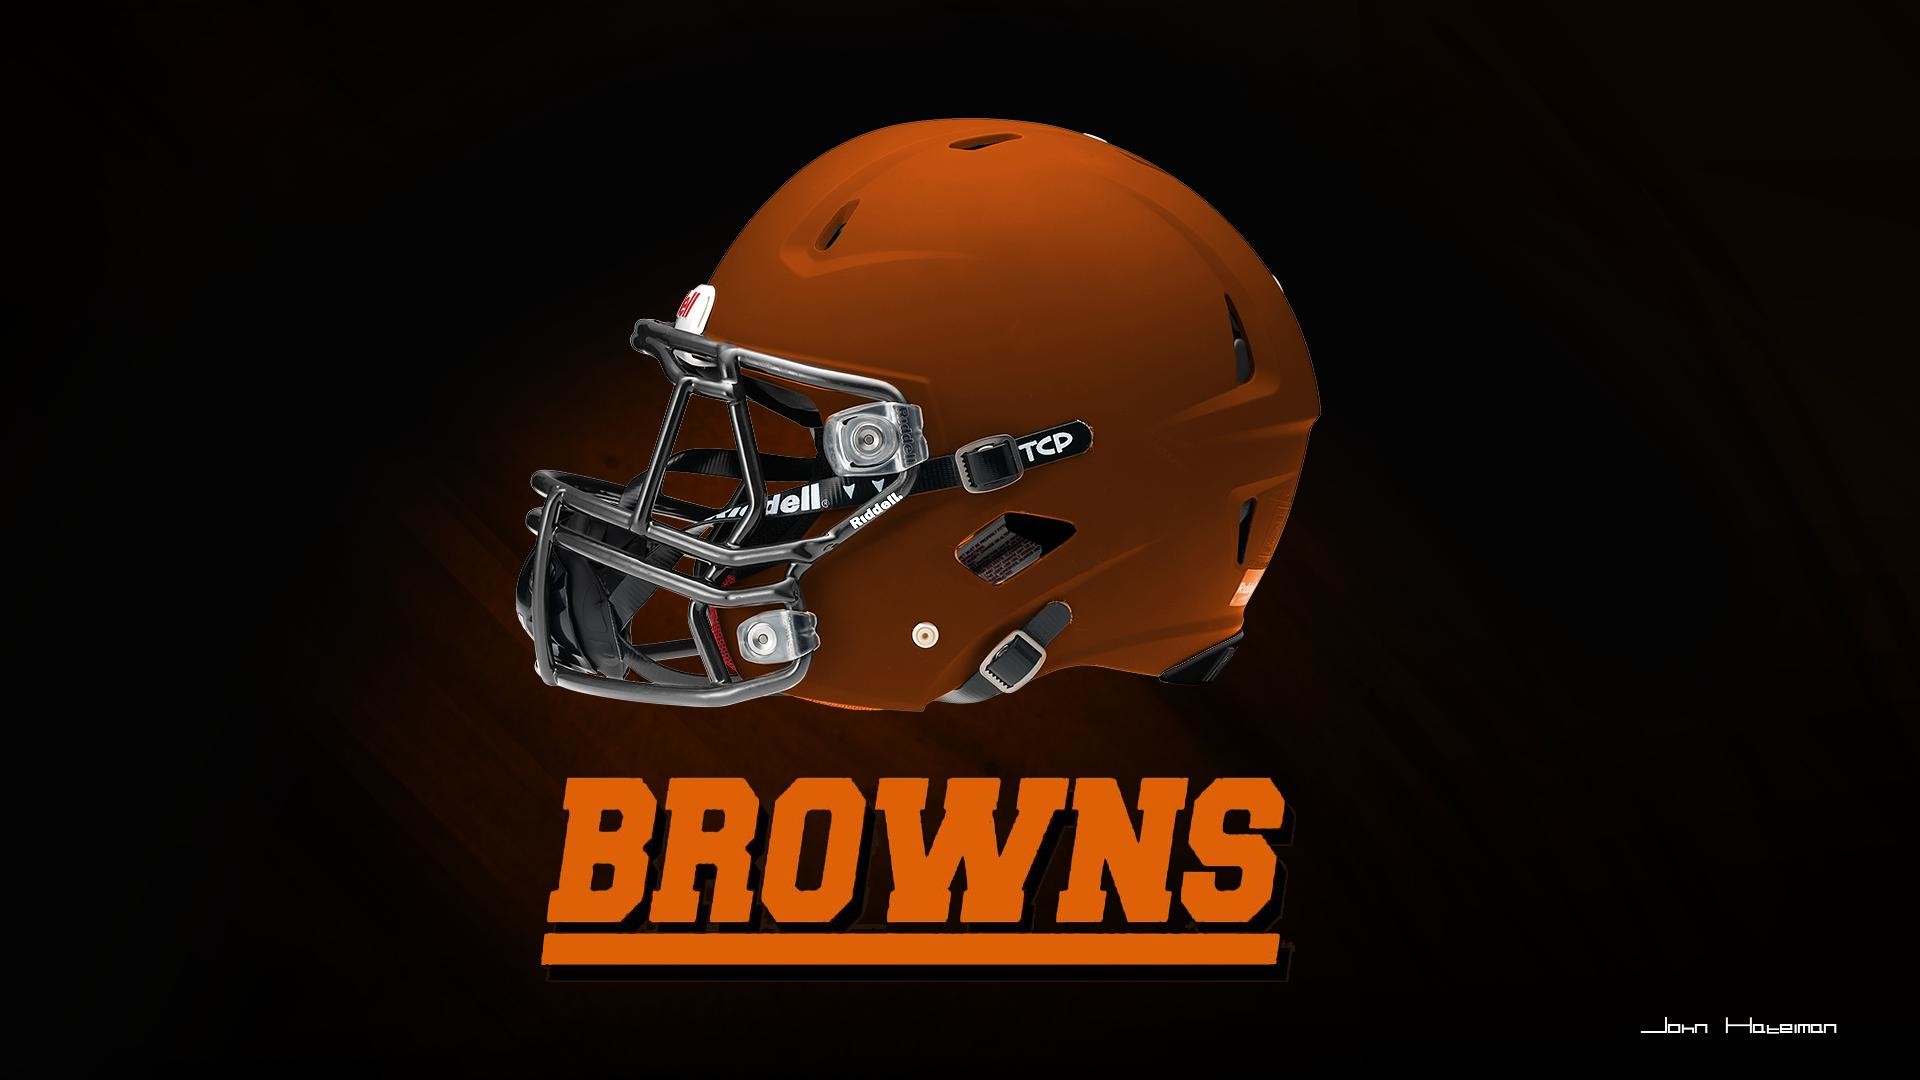 1920x1080 ... rumors of a Browns new uniform release swirling, here are all the  concepts floating around